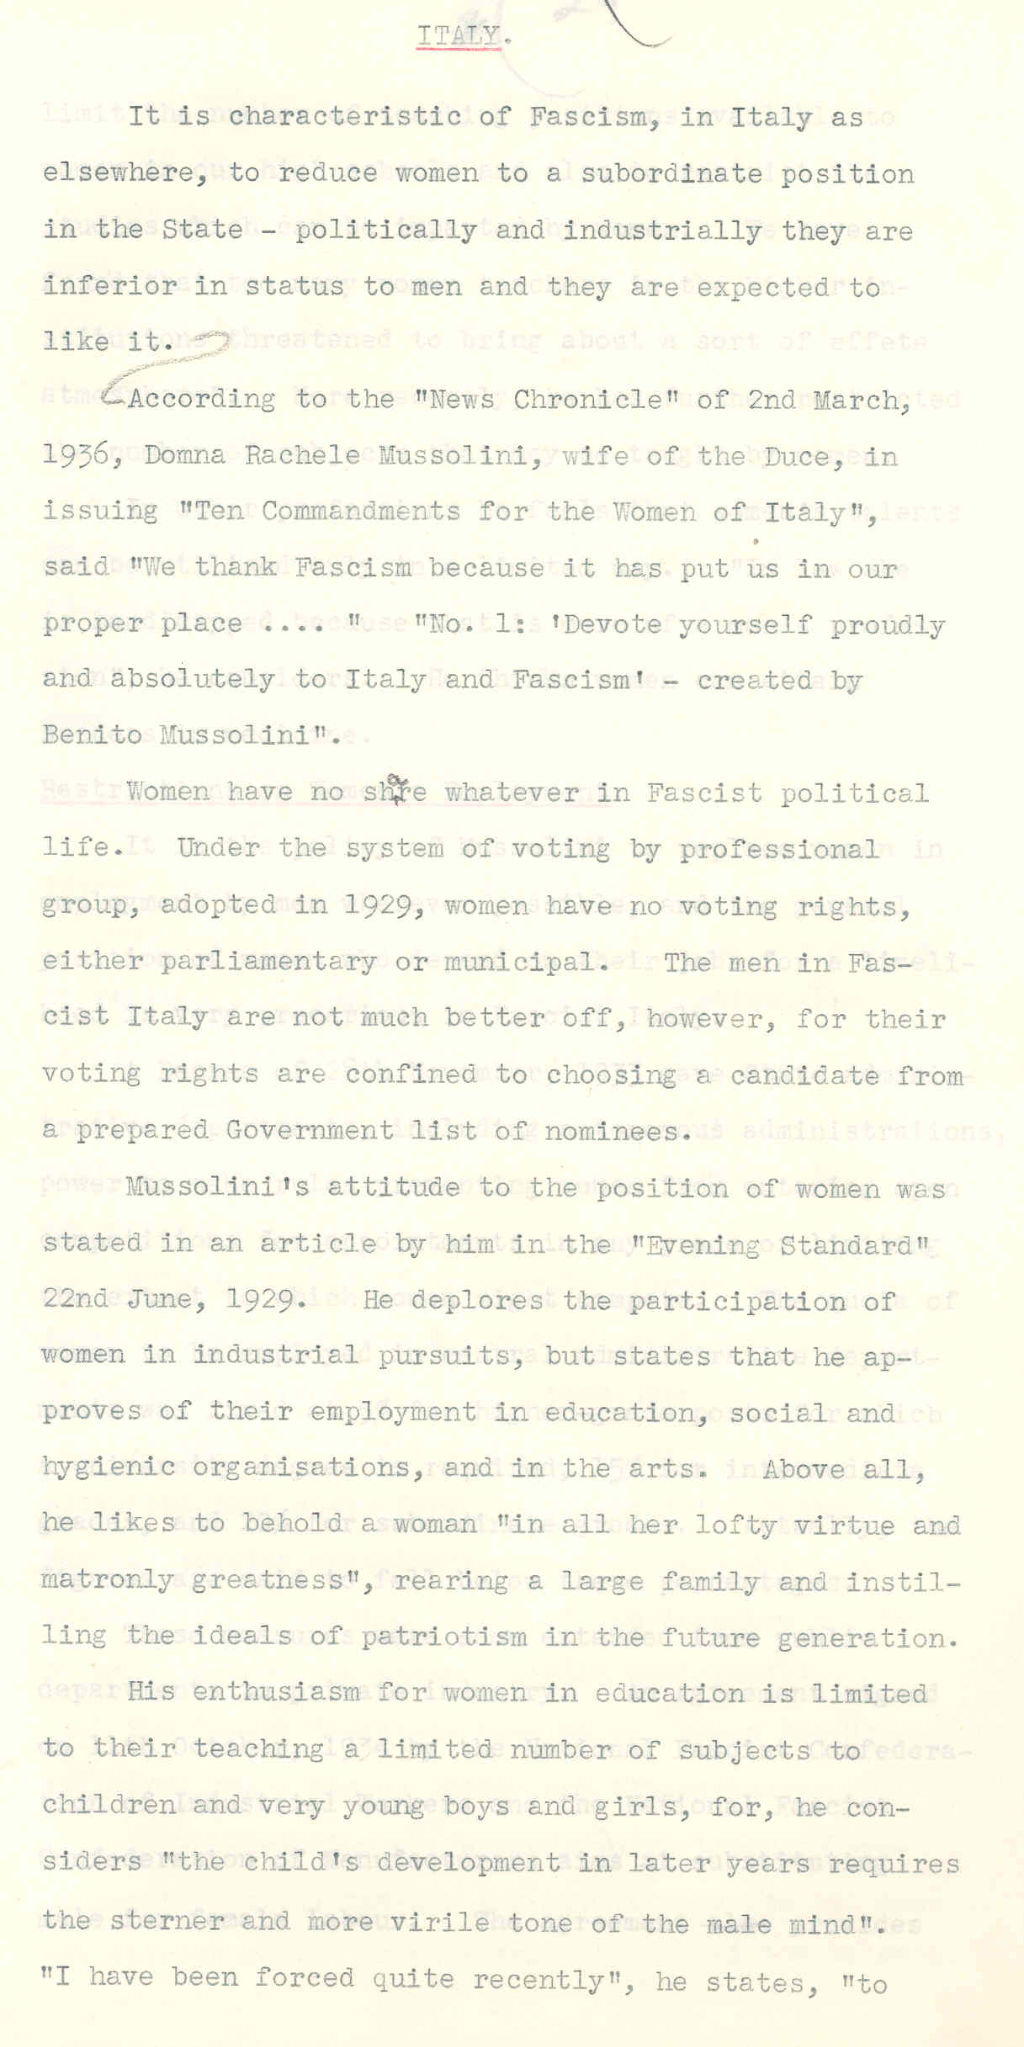 Report on the status of women under the Fascist regime in Italy, 1937